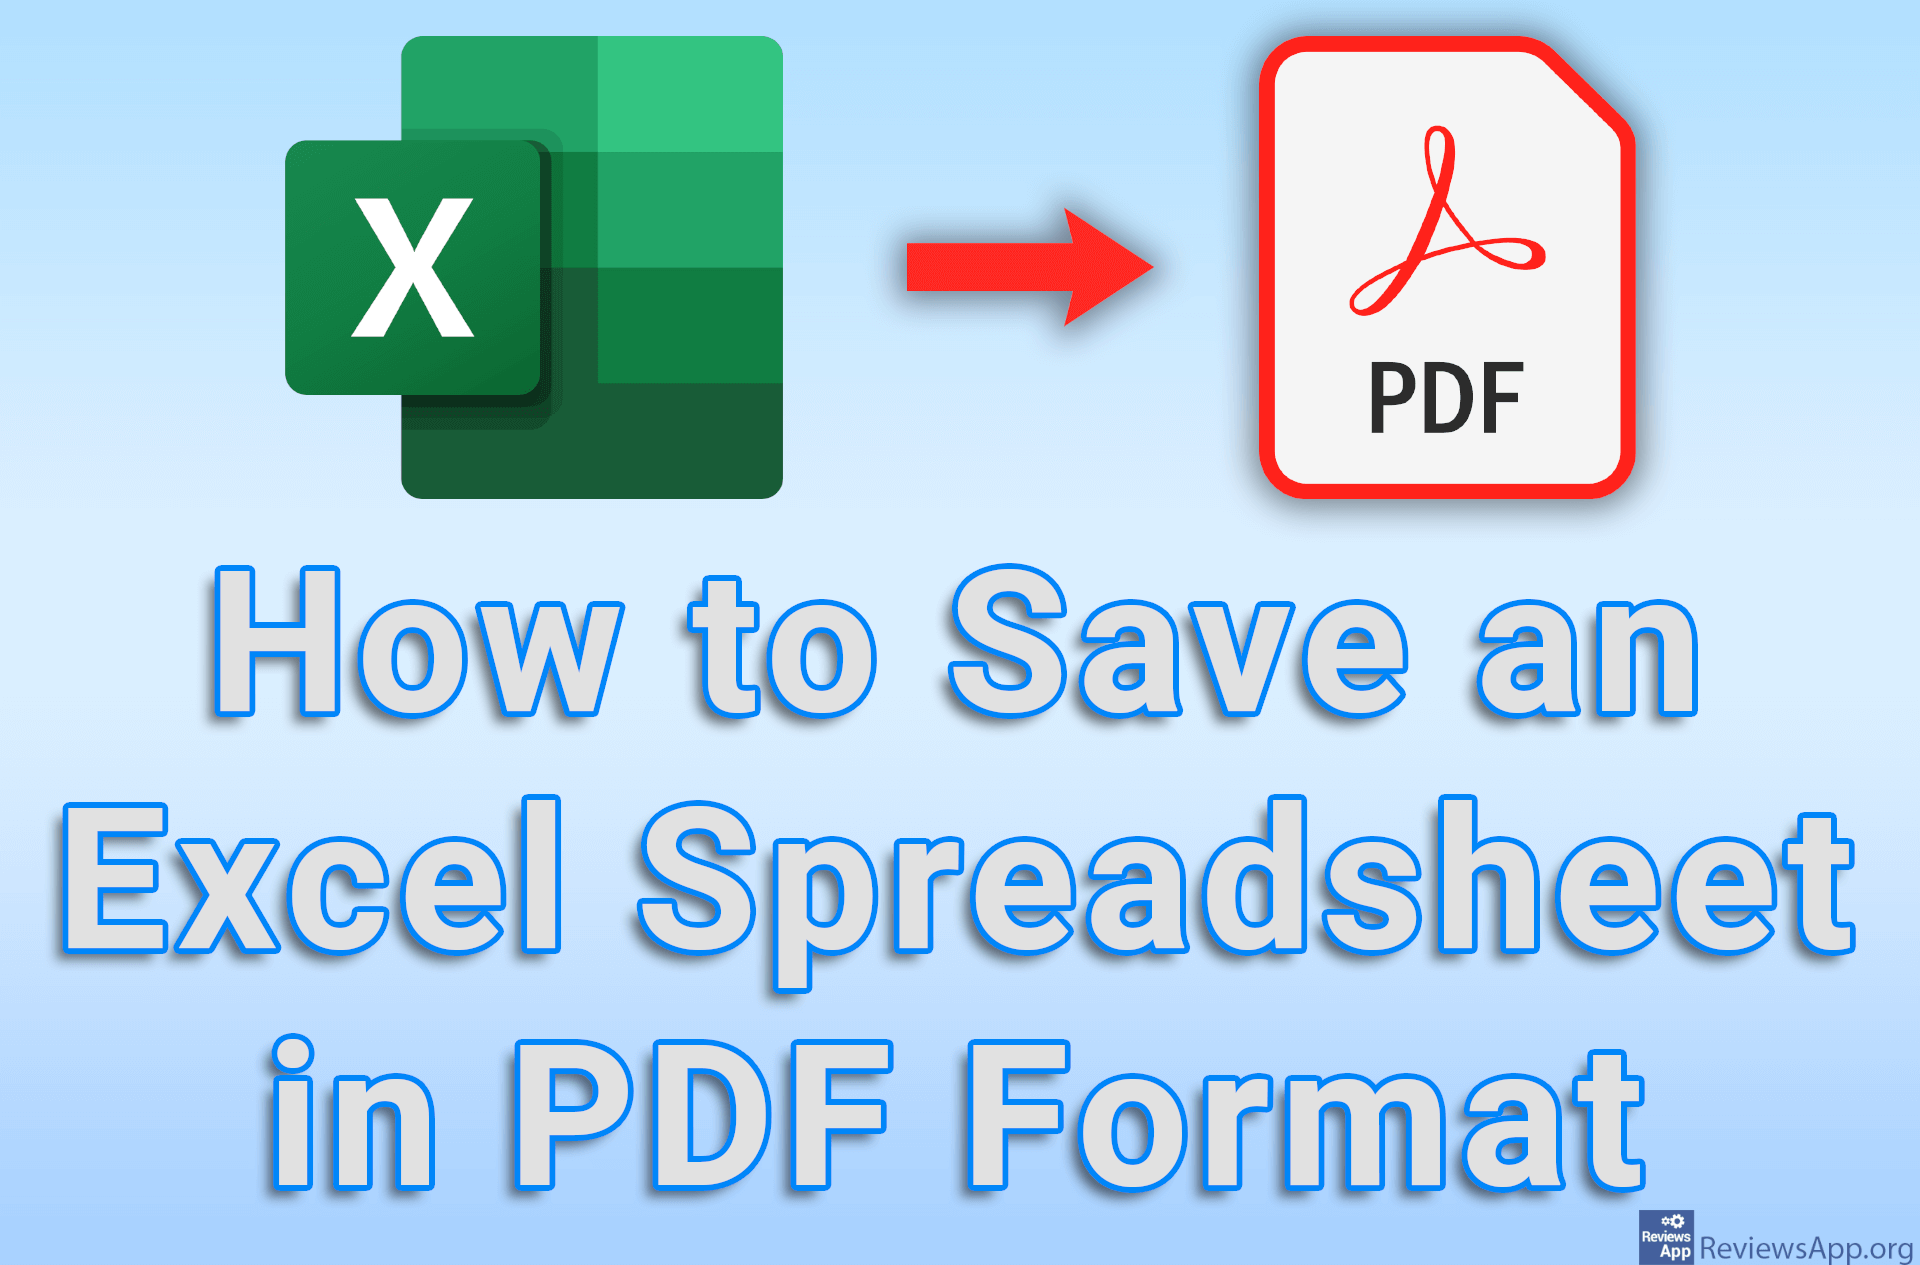 How to Save an Excel Spreadsheet in PDF Format